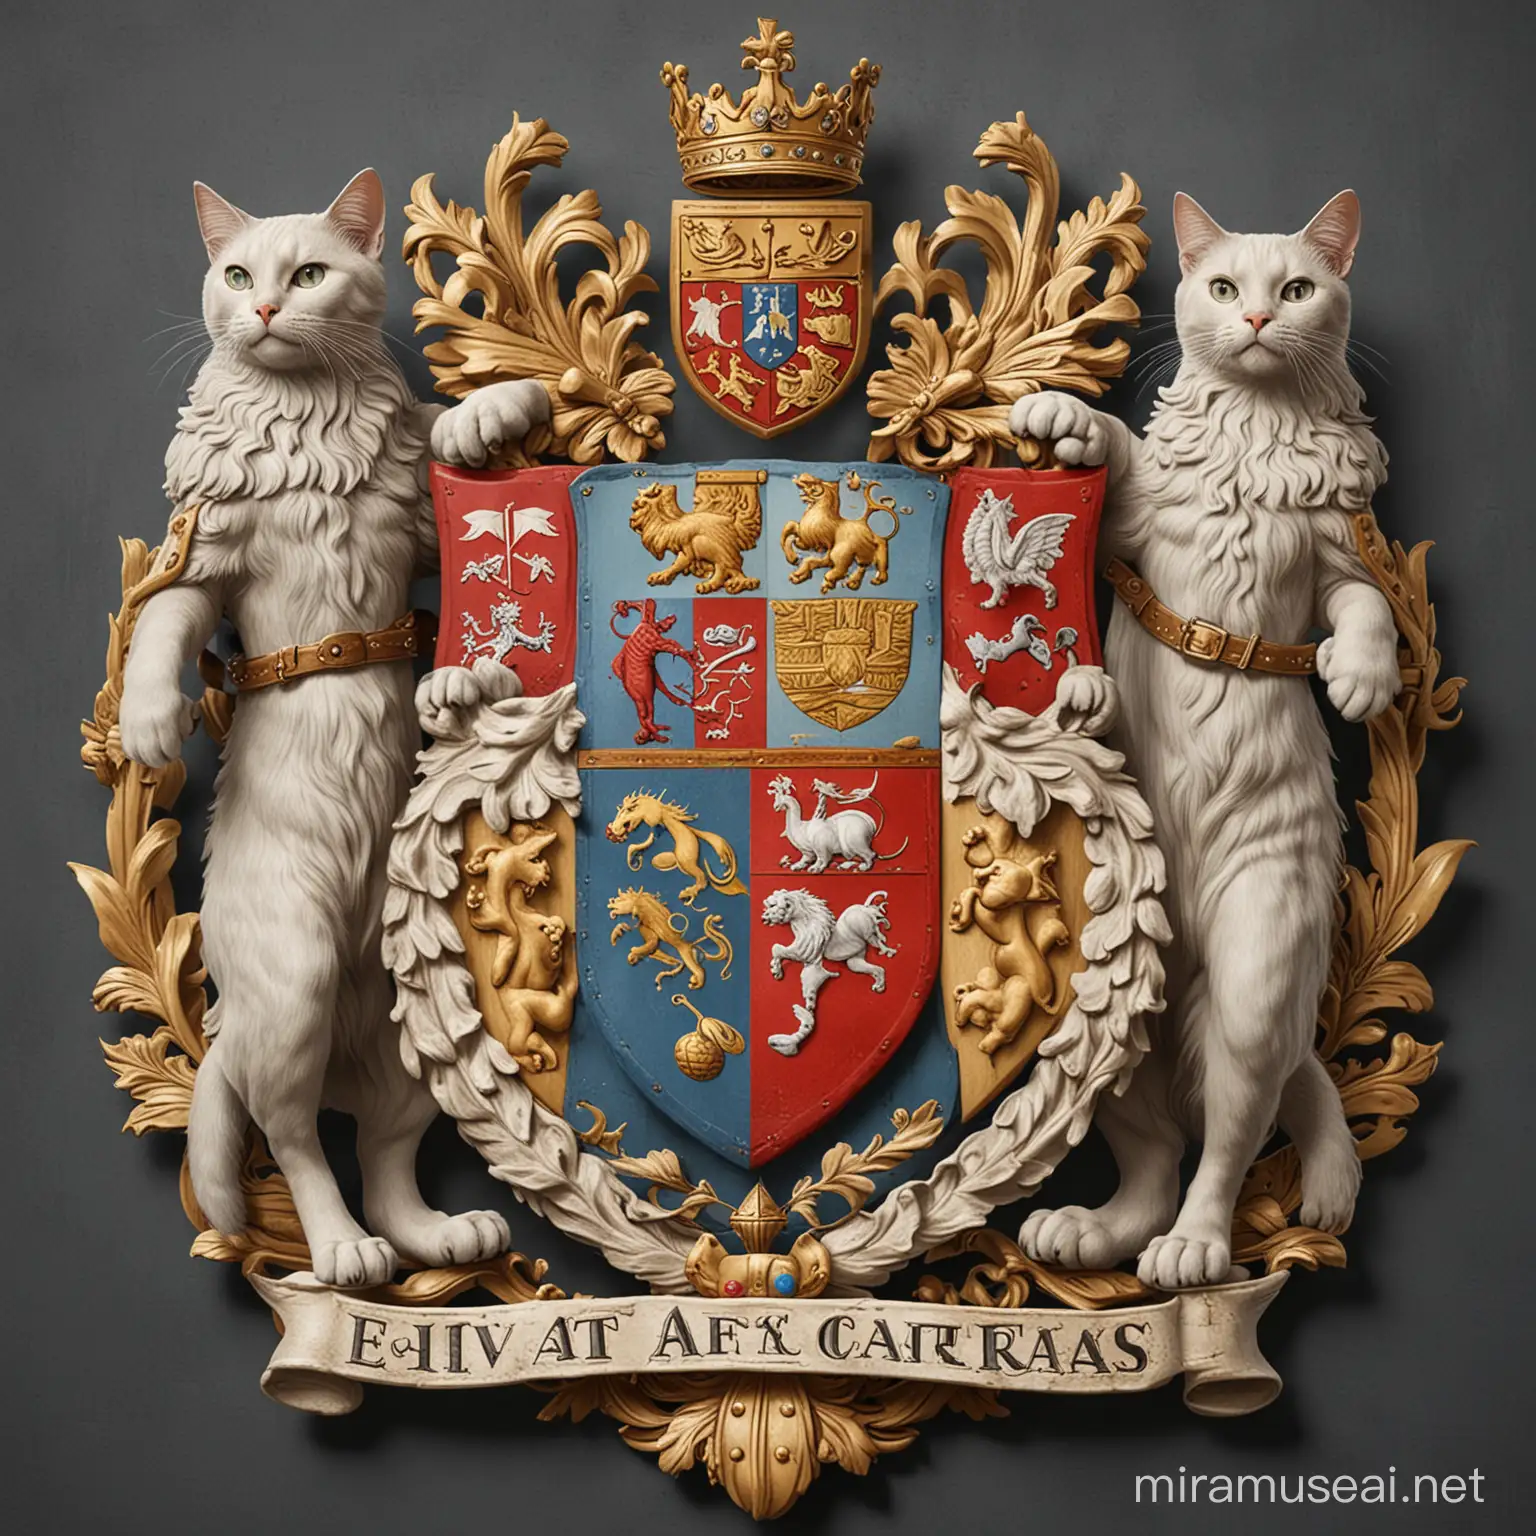 Equitable Cat Kingdom Coat of Arms Feline Majesty and Justice United